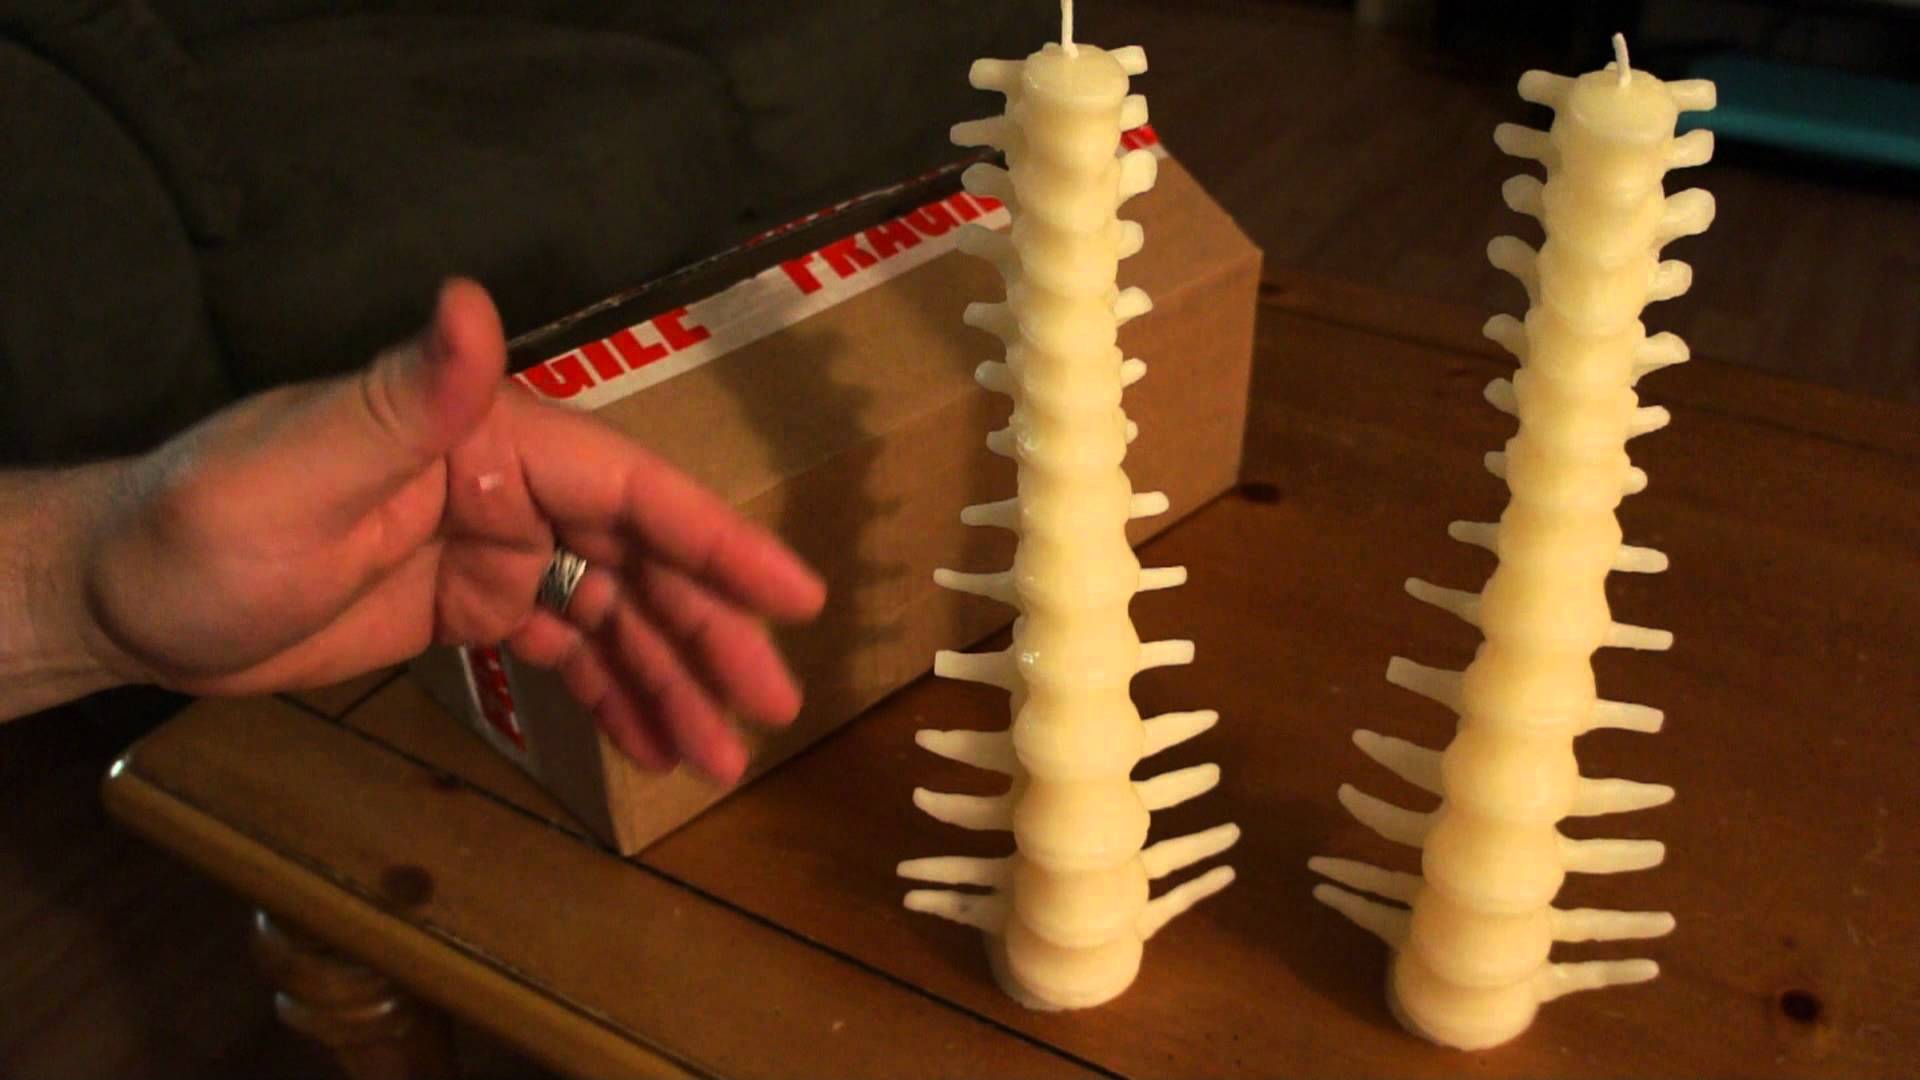 Spine candle help? | RPF Costume and Prop Maker Community